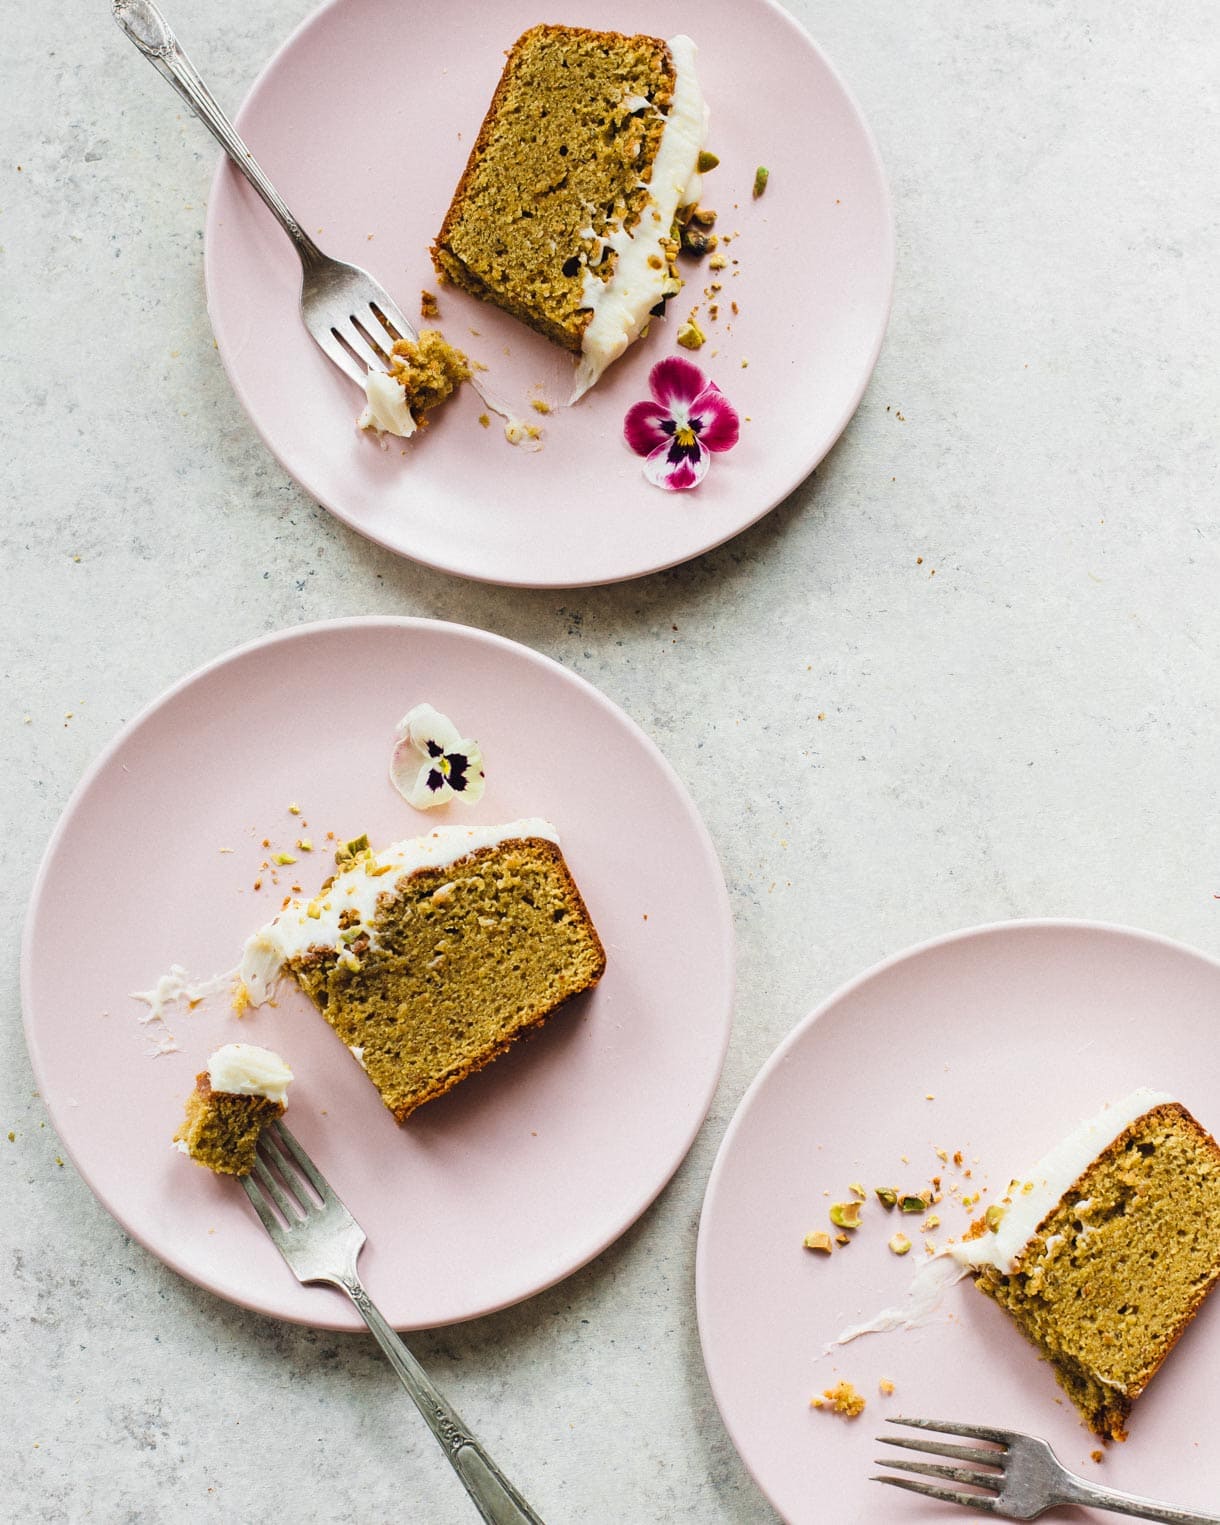 Pistachio and olive oil cake covered in white chocolate glaze